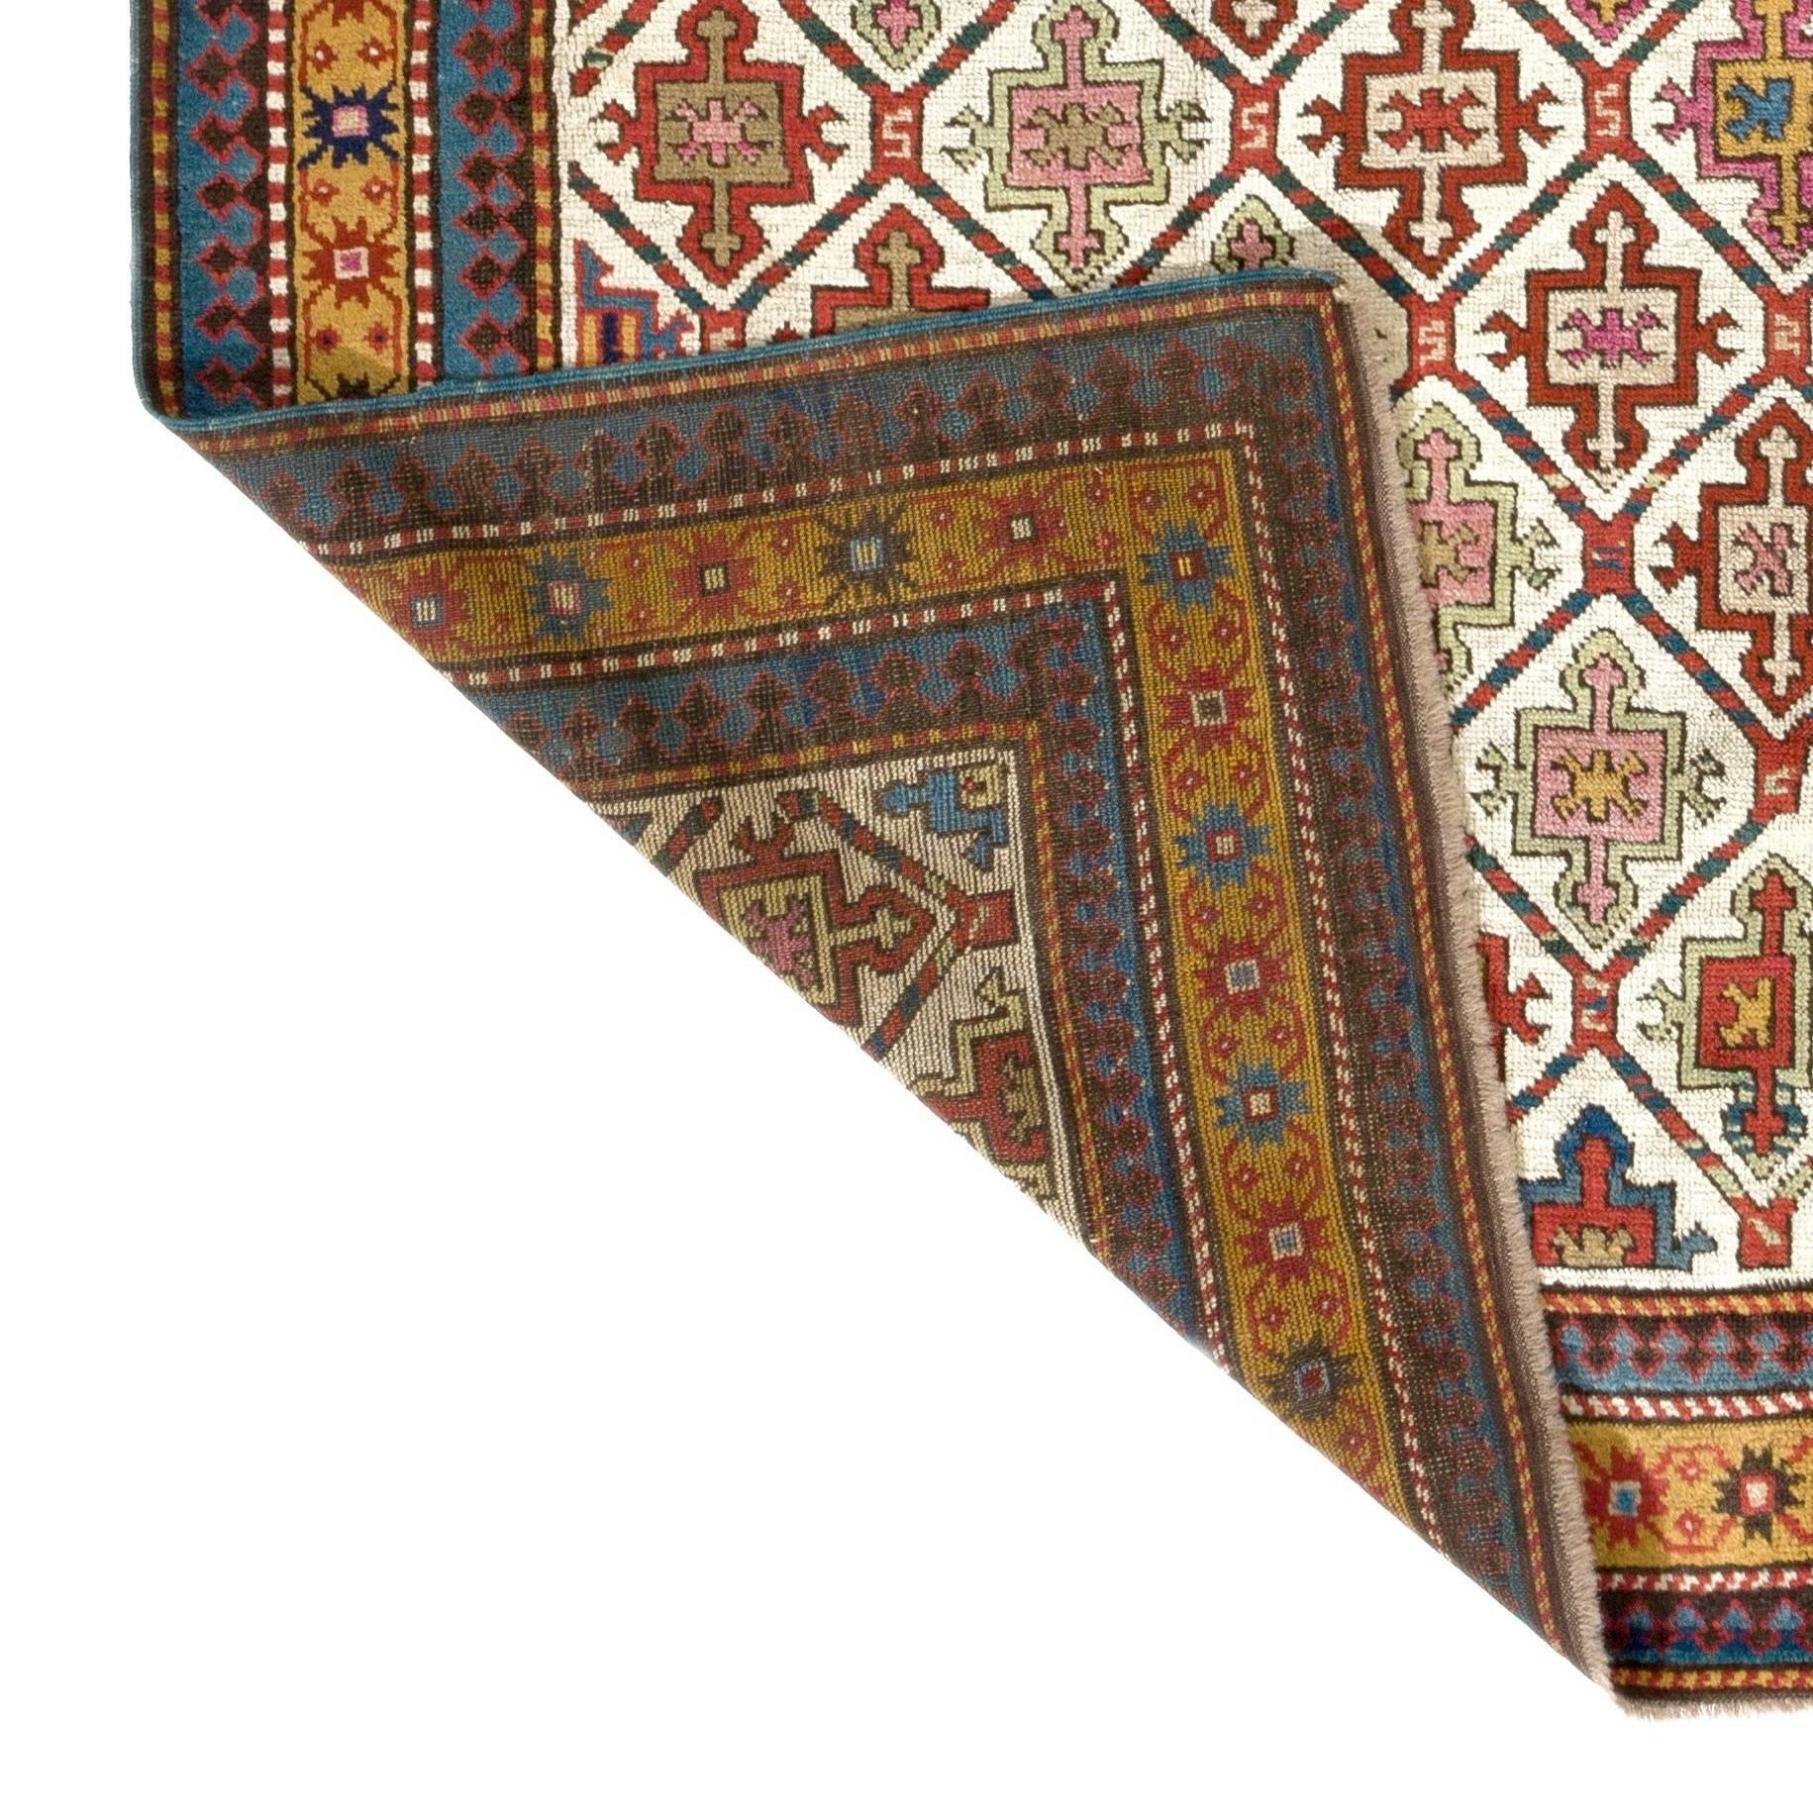 A rare and early Karabagh long rug from the first quarter of the 19th century featuring an all-over lattice work design with integrated shield and cross motifs in a subtle color palette of soft pink, sage green, beige, rust, navy blue and cerulean